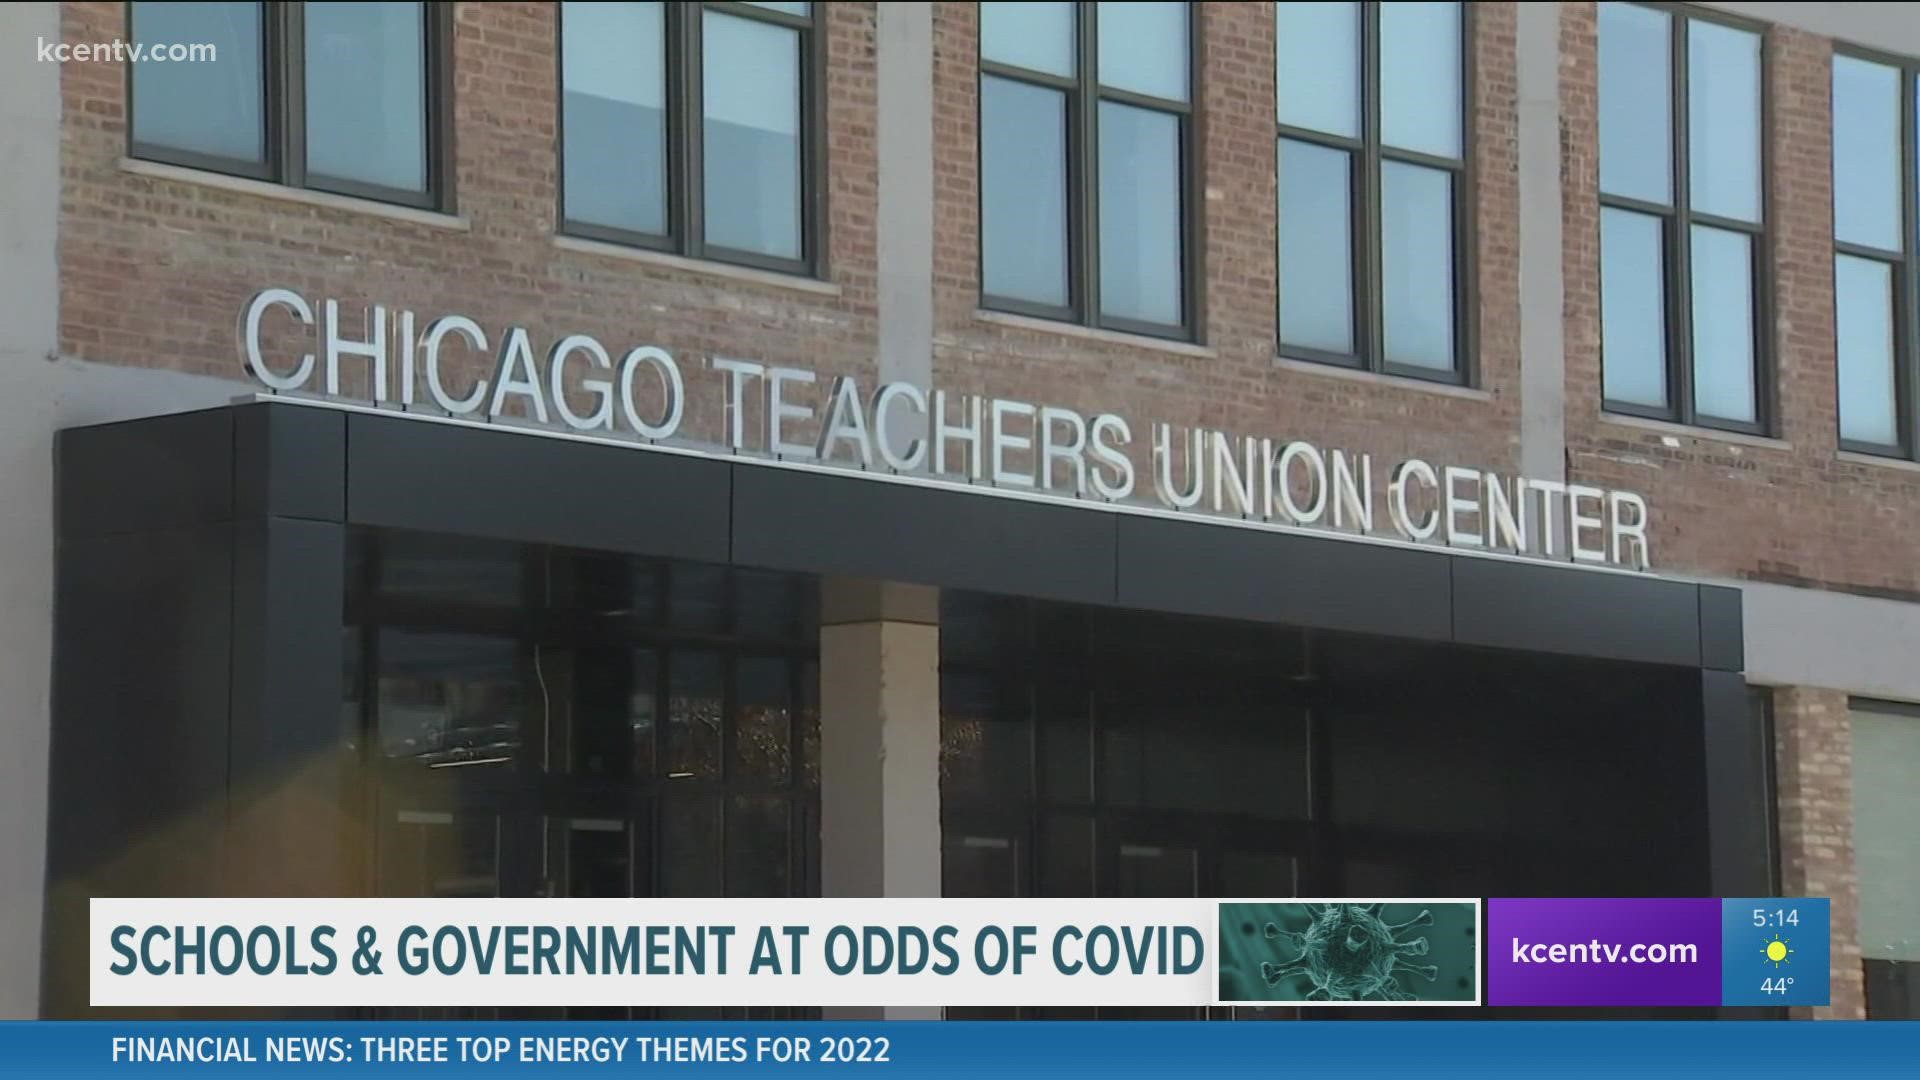 Chicago Public Schools are canceled in Chicago today due to a dispute between teachers and school leaders over remote learning.